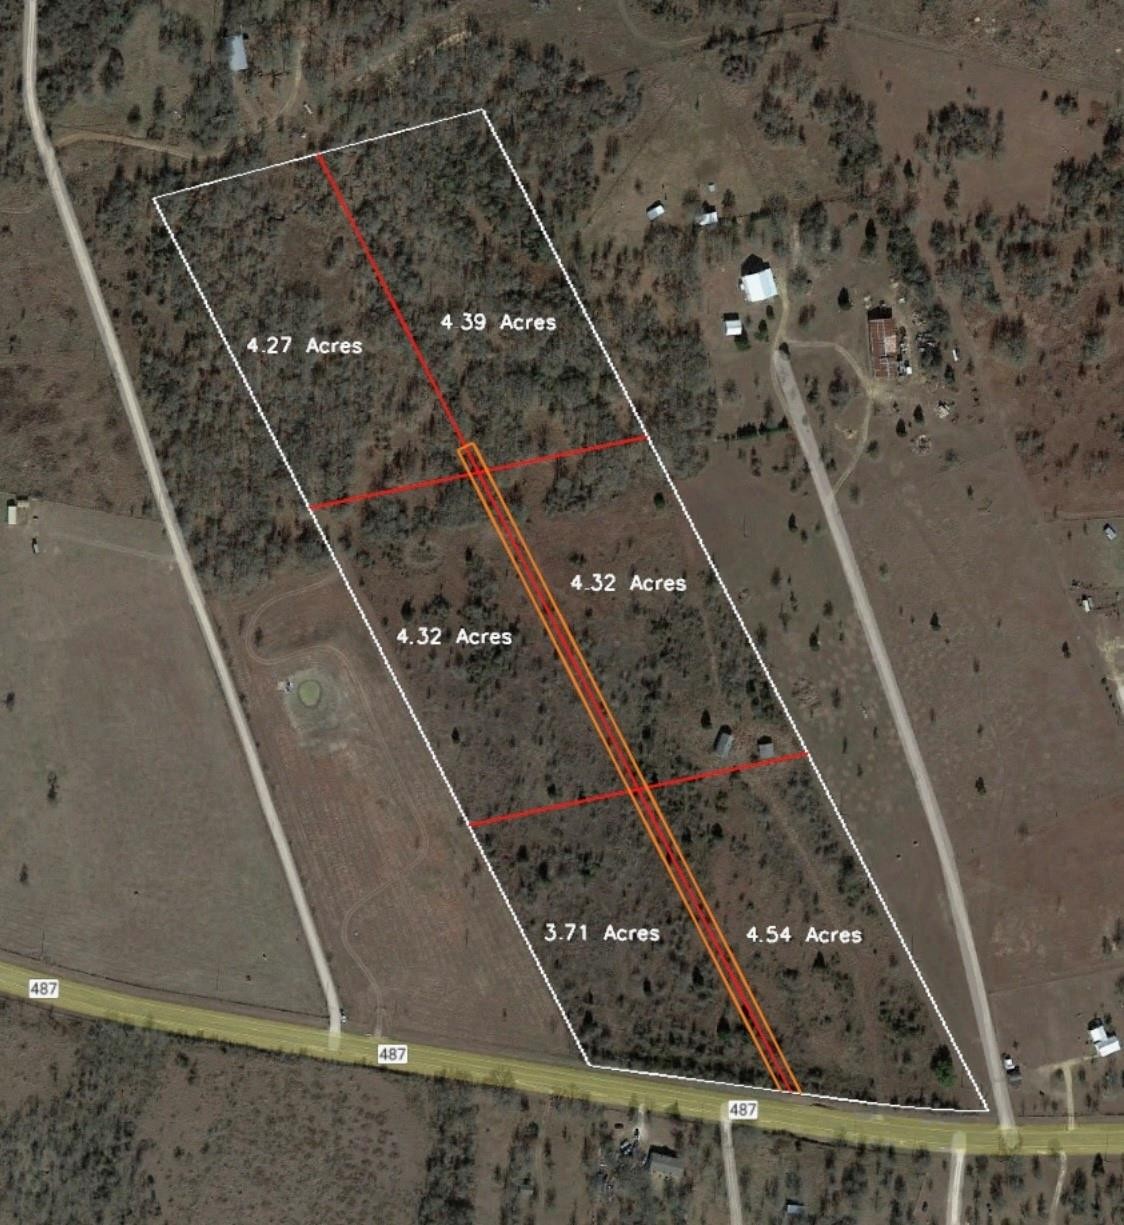 1. 15458 N Fm 487, Tract 1 &amp; Tract 2